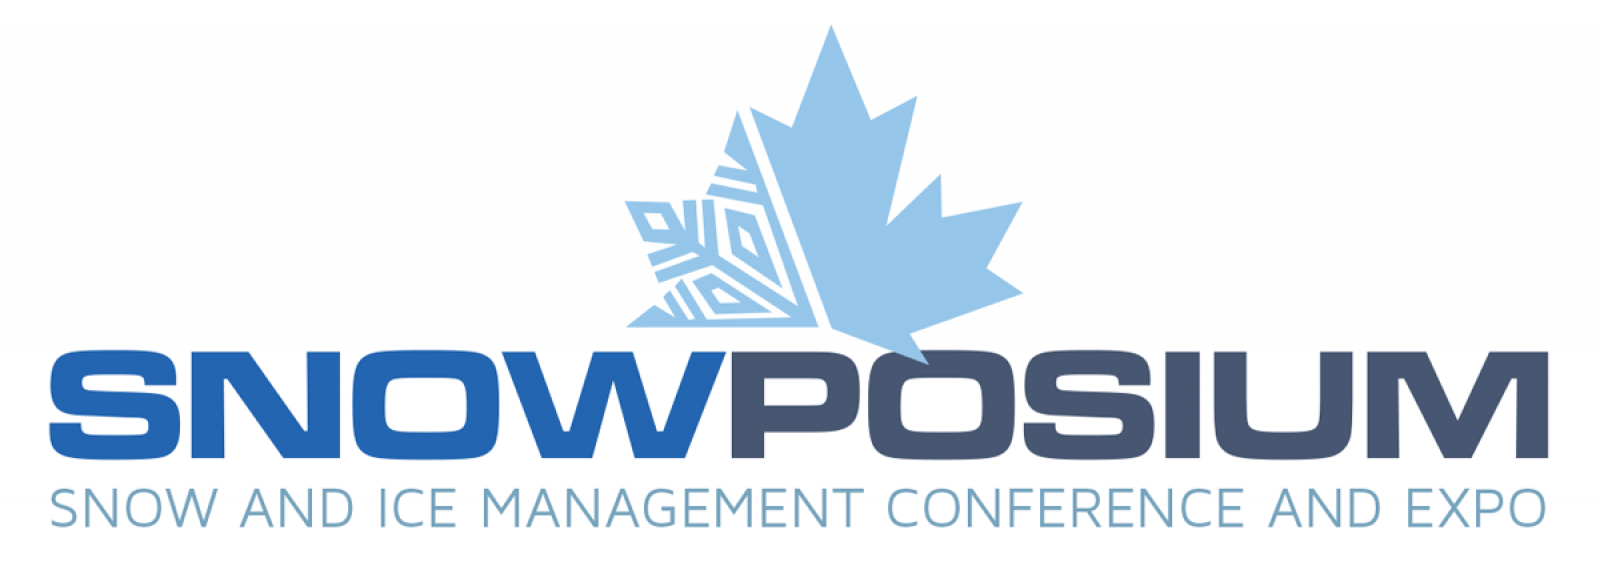 Snowposium returns — with updates on the liability crisis